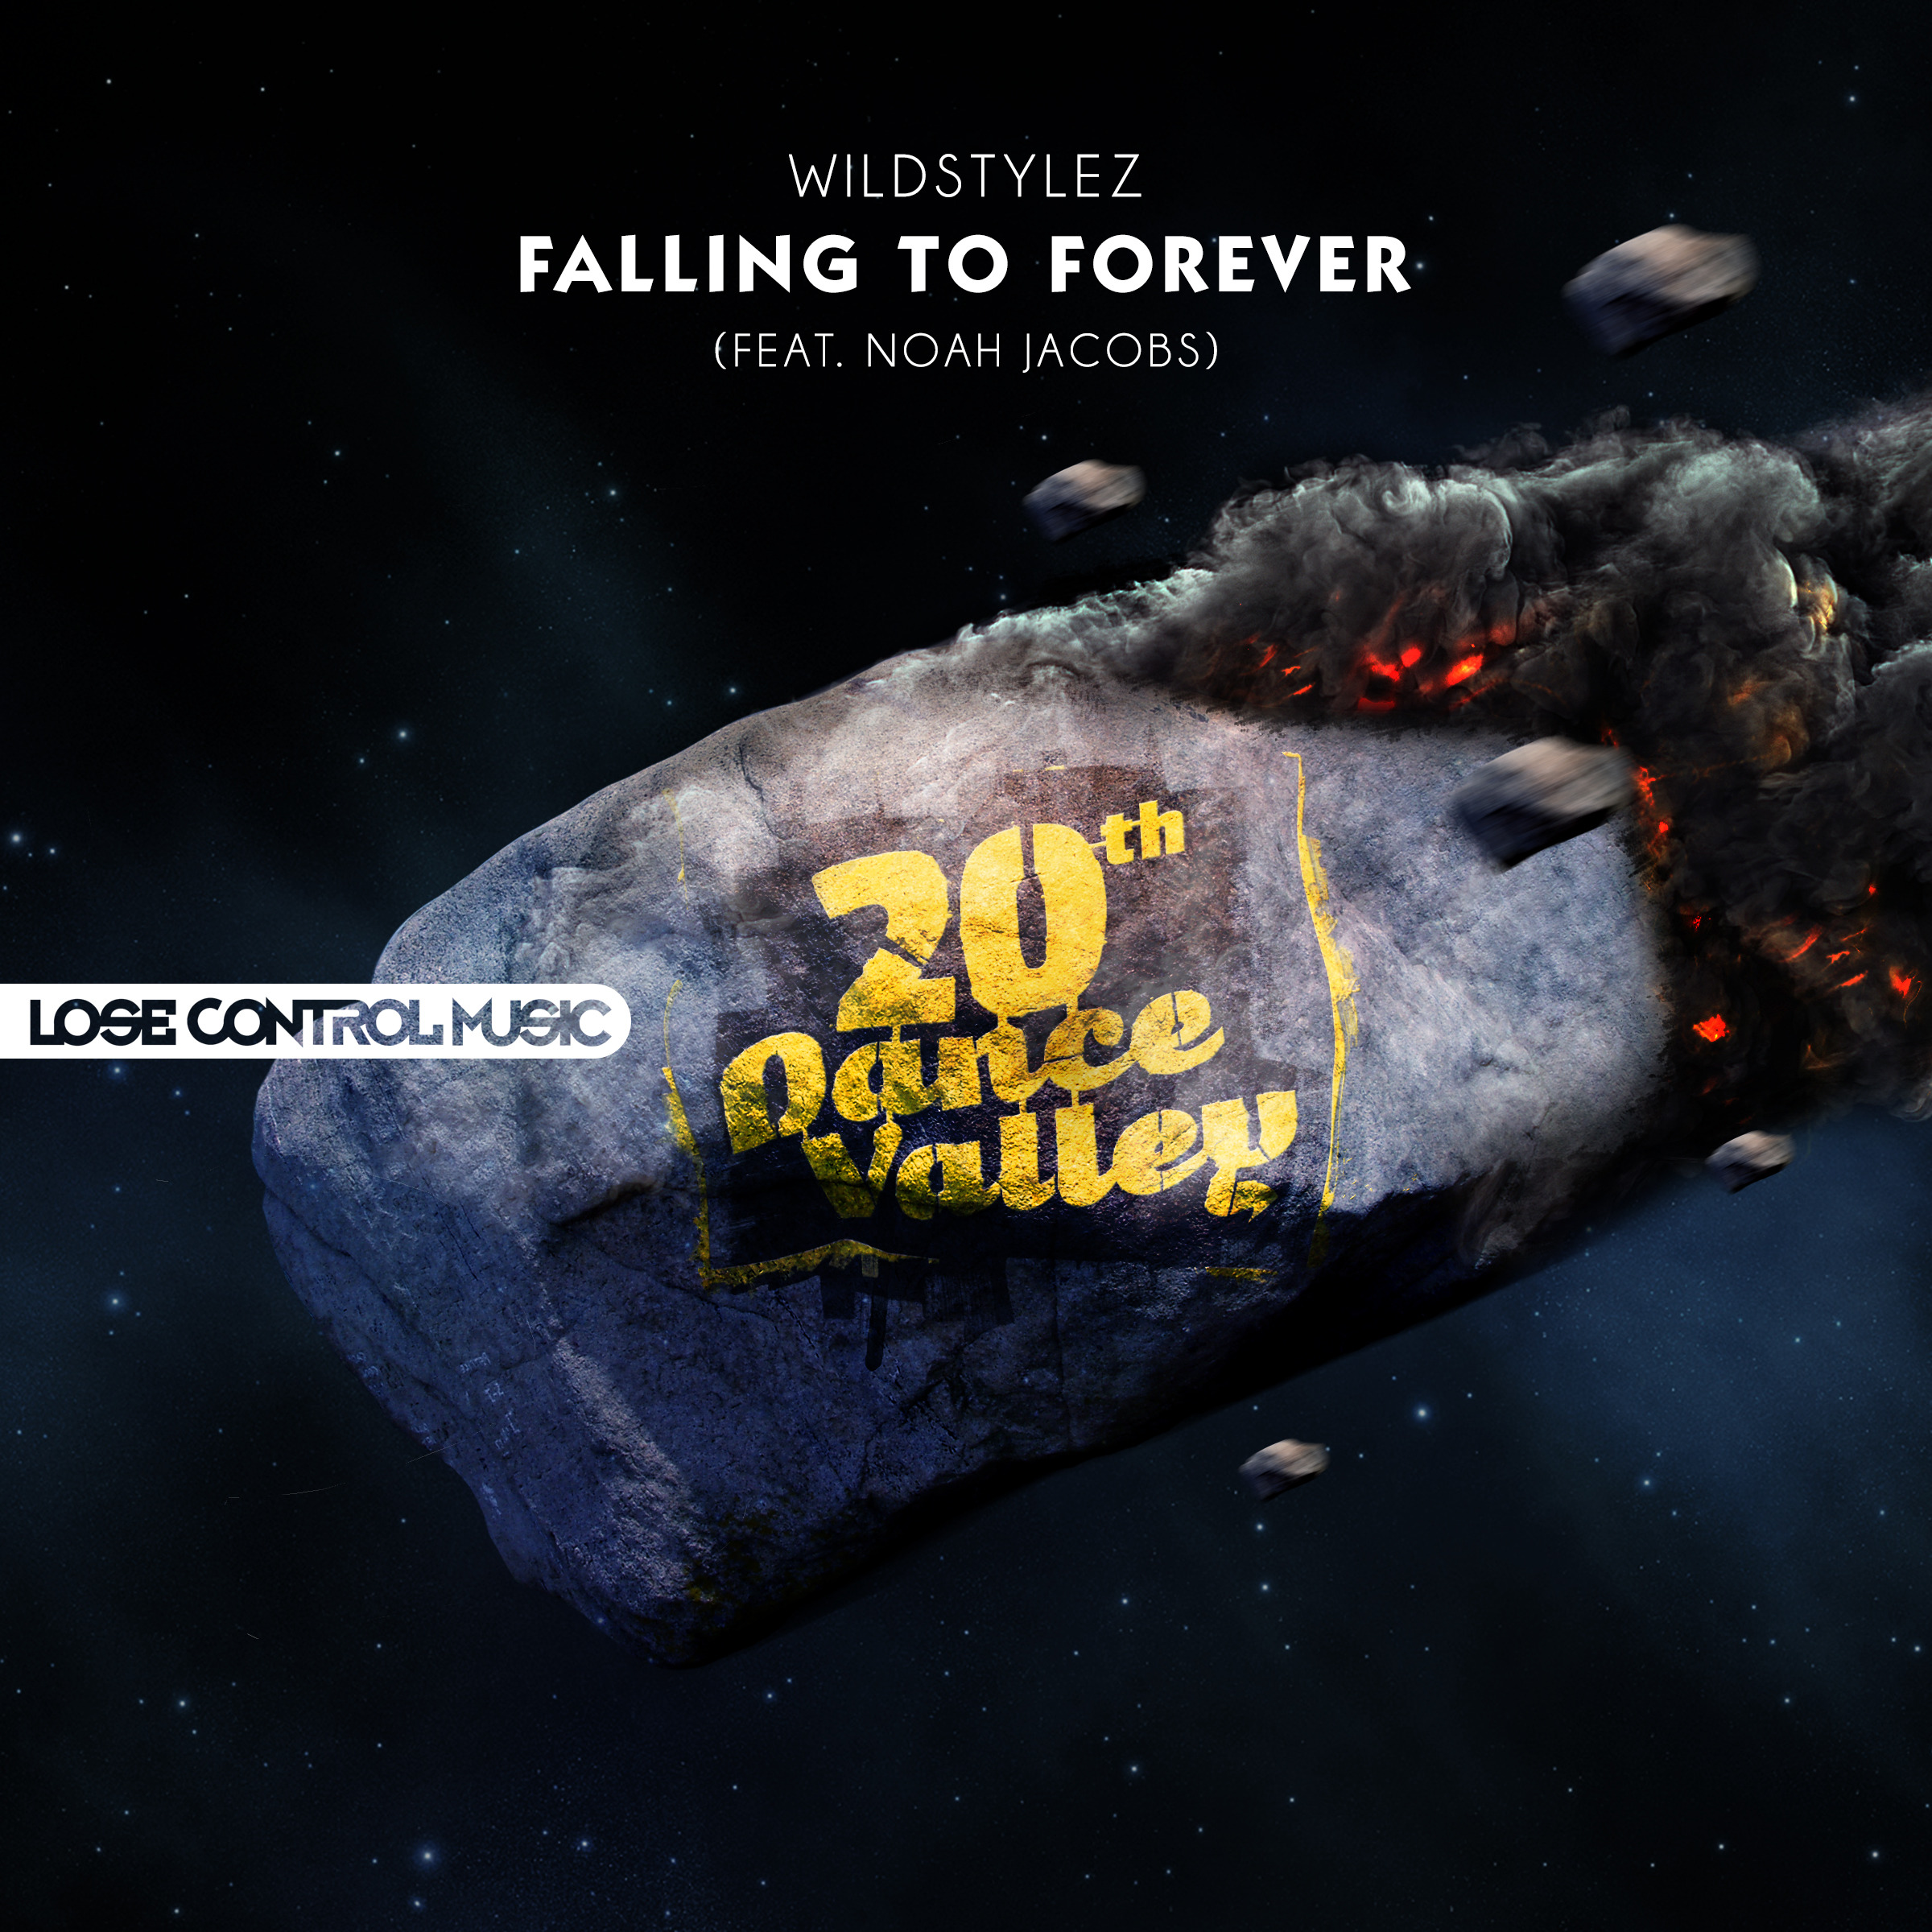 Wildstylez ft. featuring Noah Jacobs Falling To Forever cover artwork